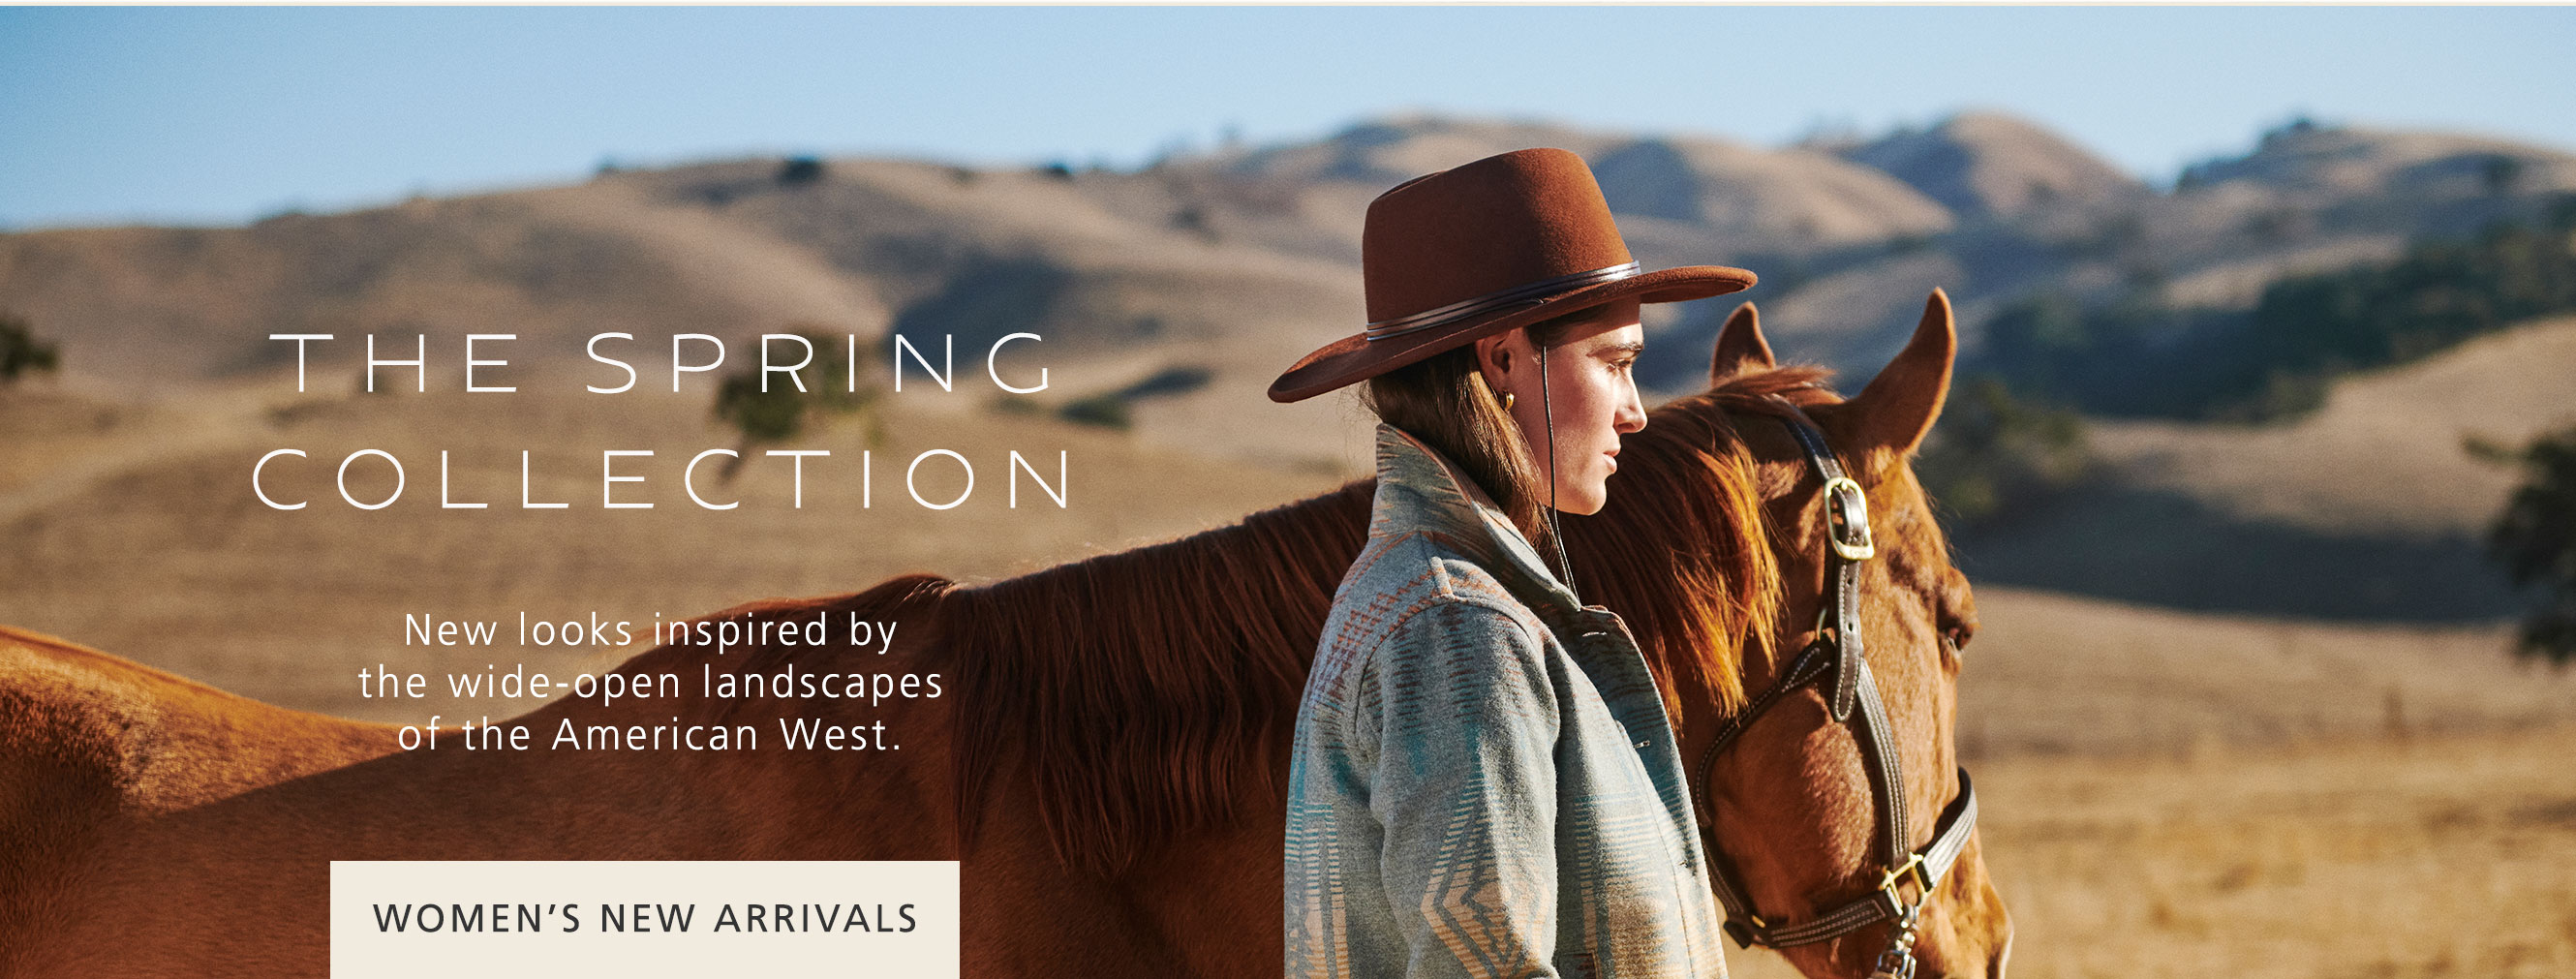 The Pendleton Spring Collection - New looks inspired by the wide-open landscapes of the American West - Shop Women's New Arrivals